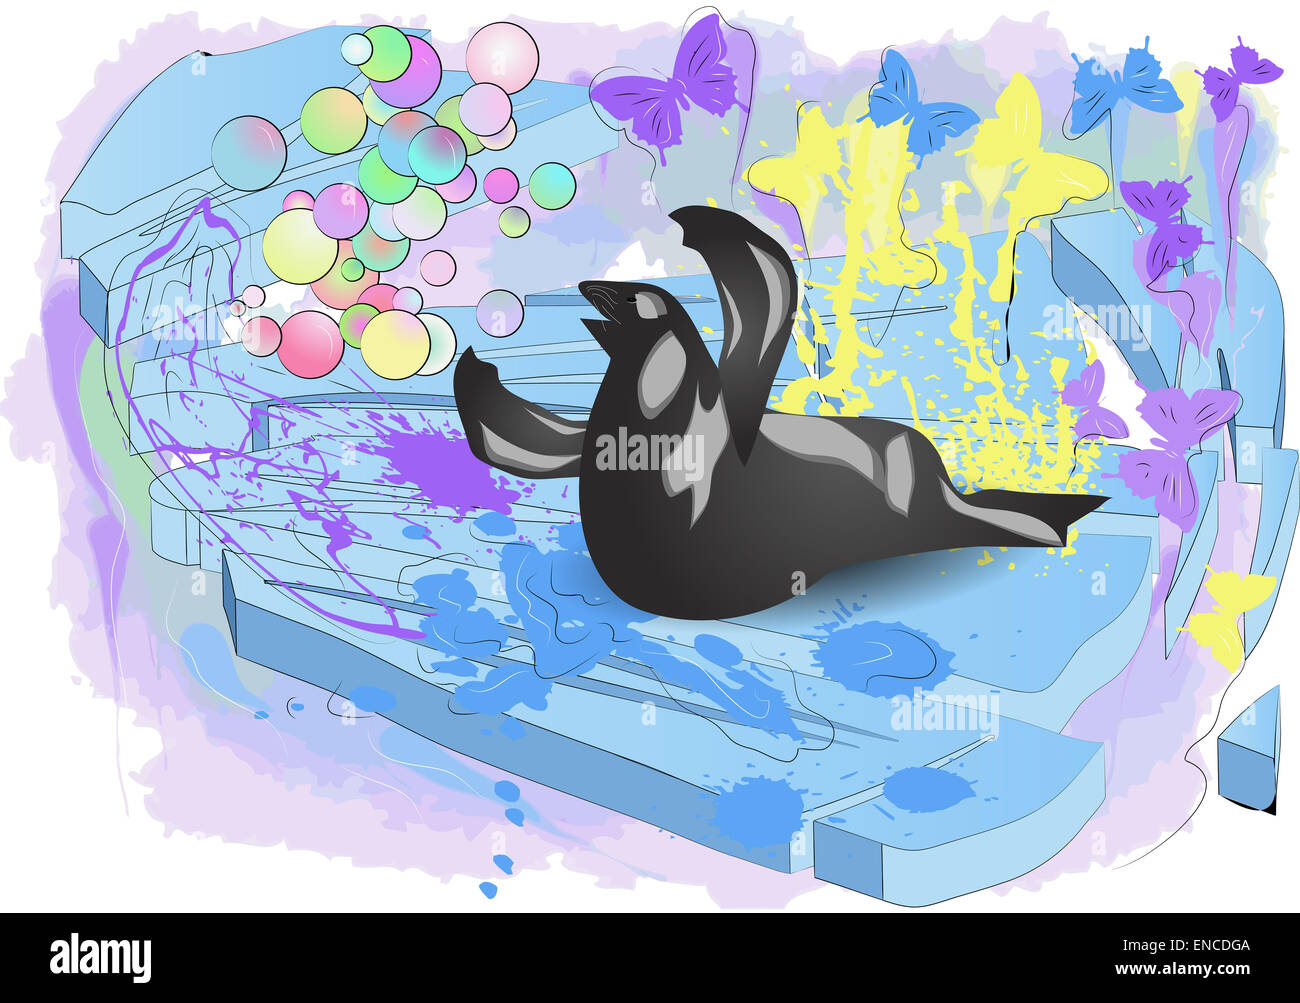 walrus on ice with butterfly and multicolot bubble Stock Photo